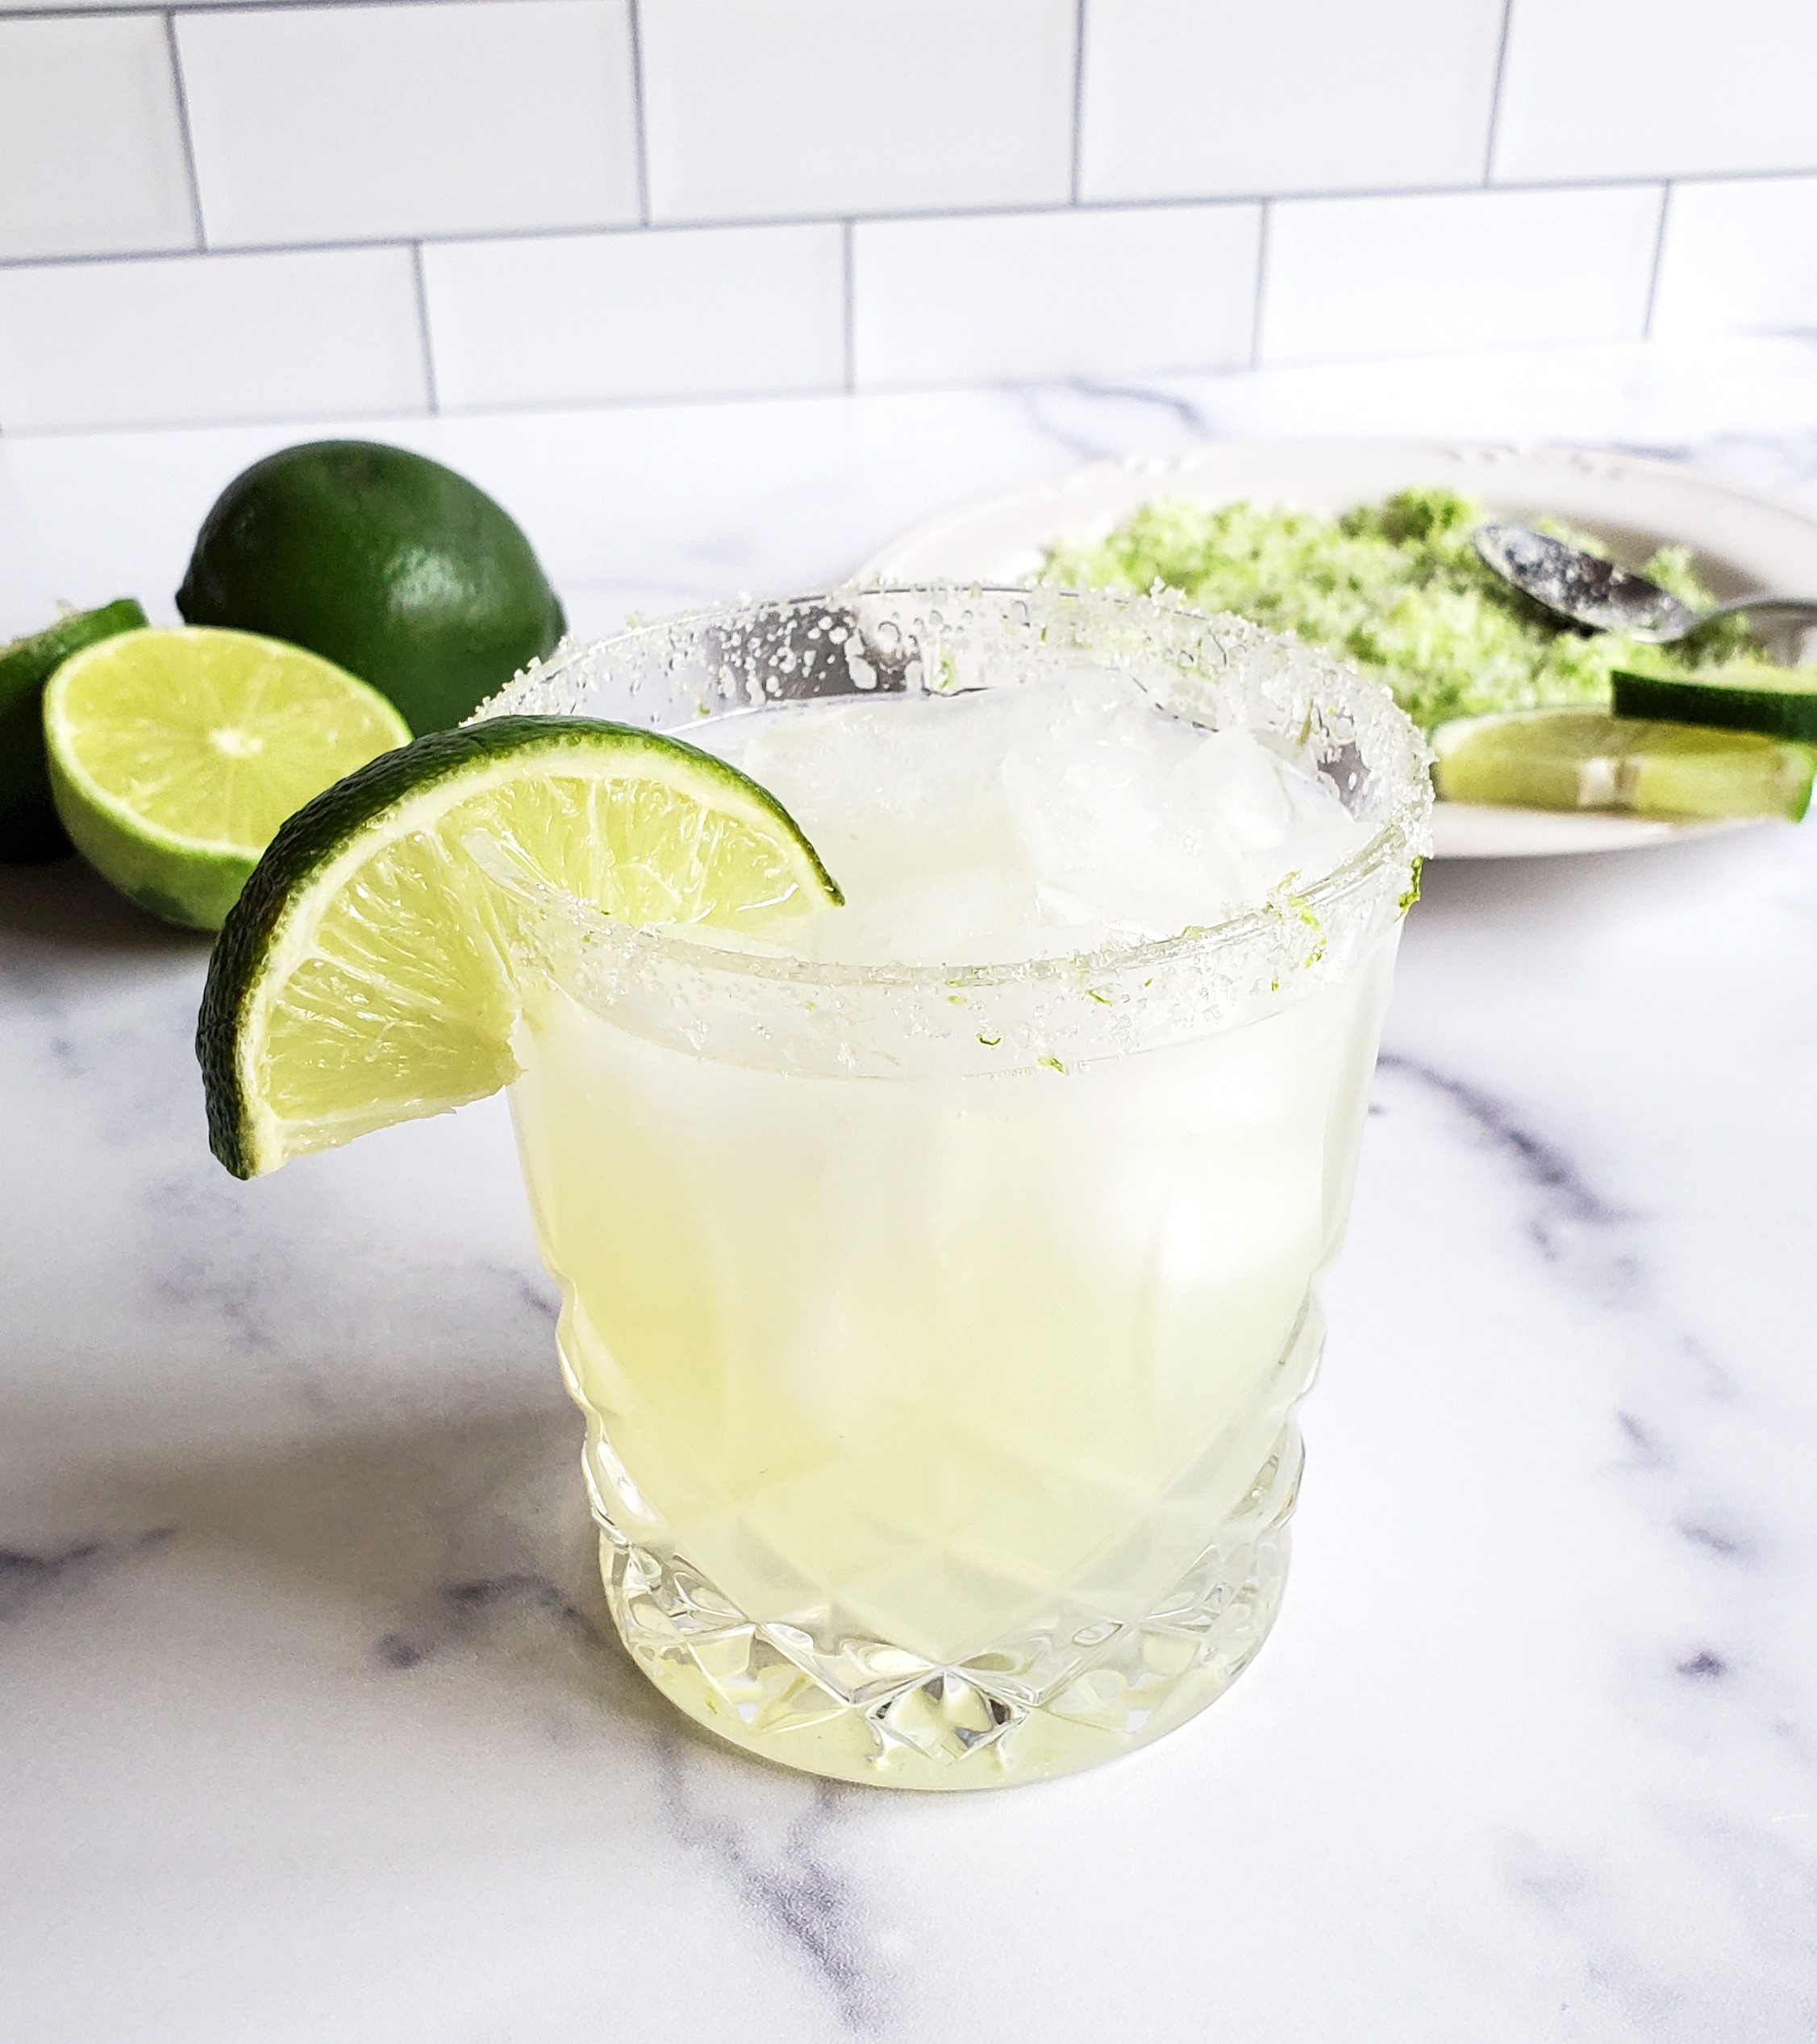 A margarita garnished with a lime wedge sits in front of cut up limes and a plant of a sugar/salt mixture.